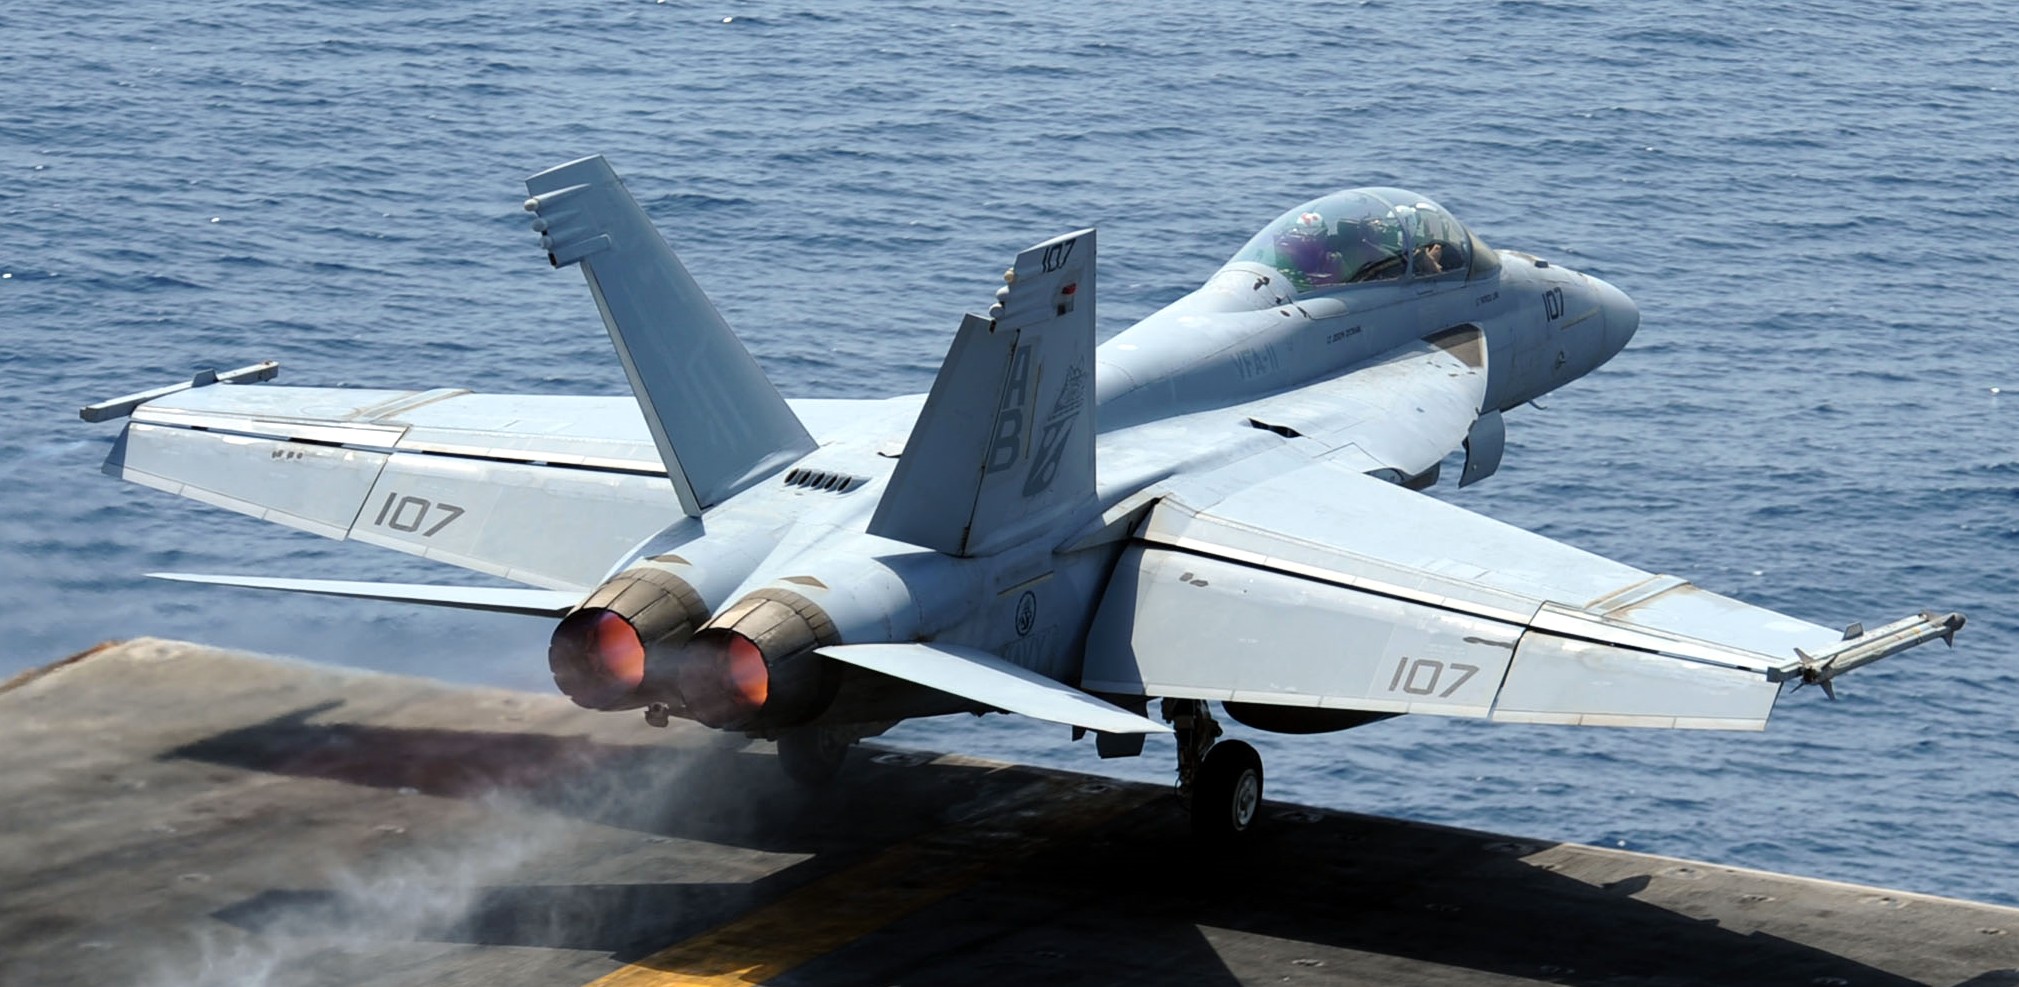 vfa-11 red rippers strike fighter squadron us navy f/a-18f super hornet carrier air wing cvw-1 uss enterprise cvn-65 33